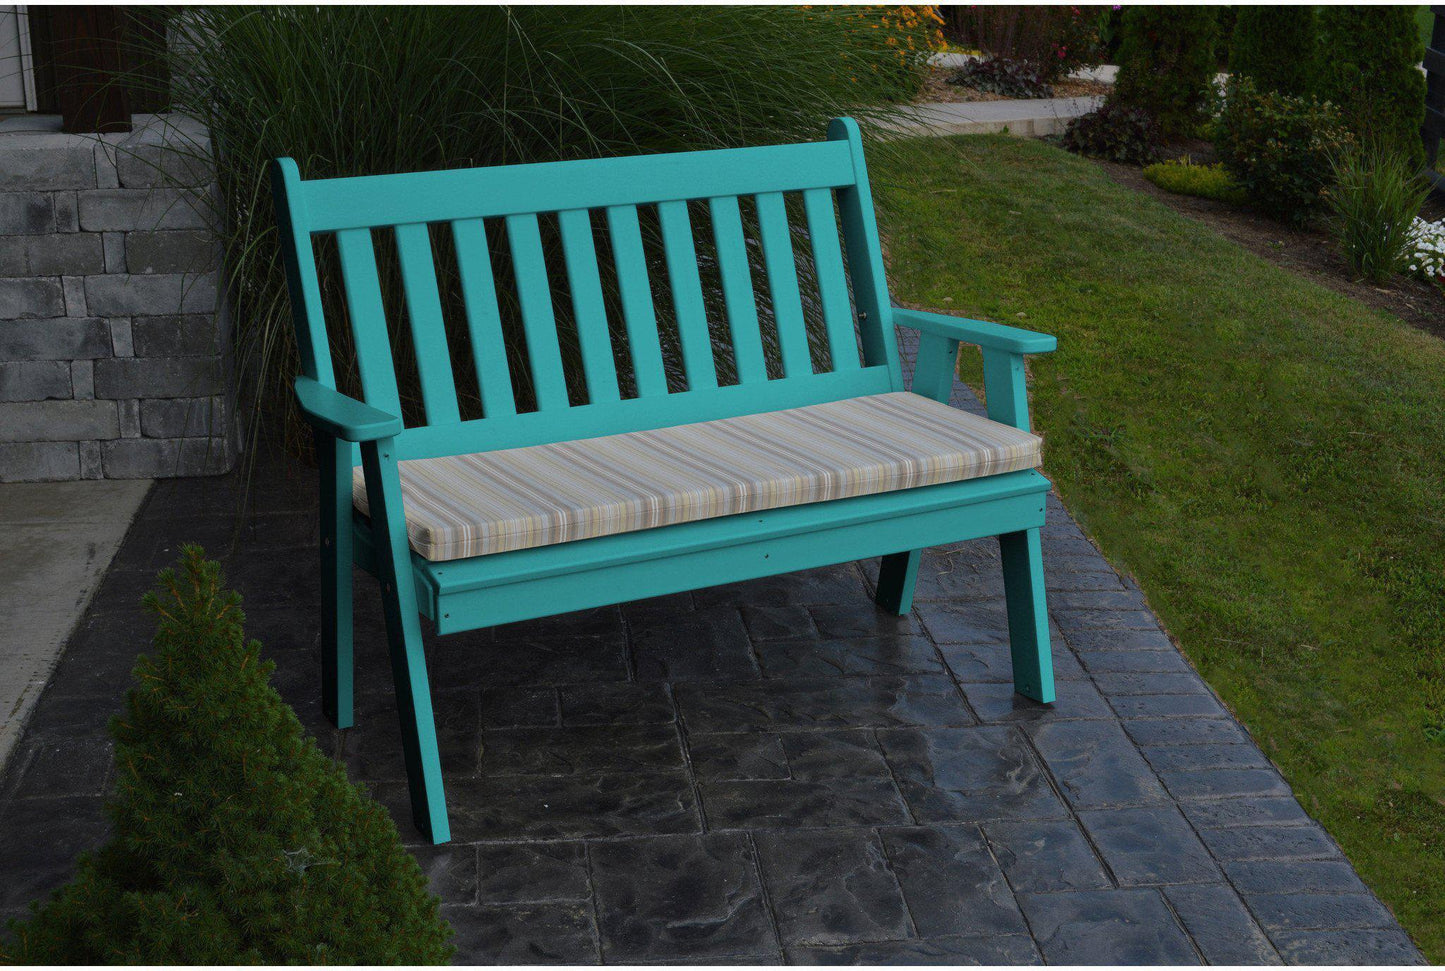 Outdoor Bench - A&L Furniture Company Recycled Plastic 5' Traditional English Garden Bench